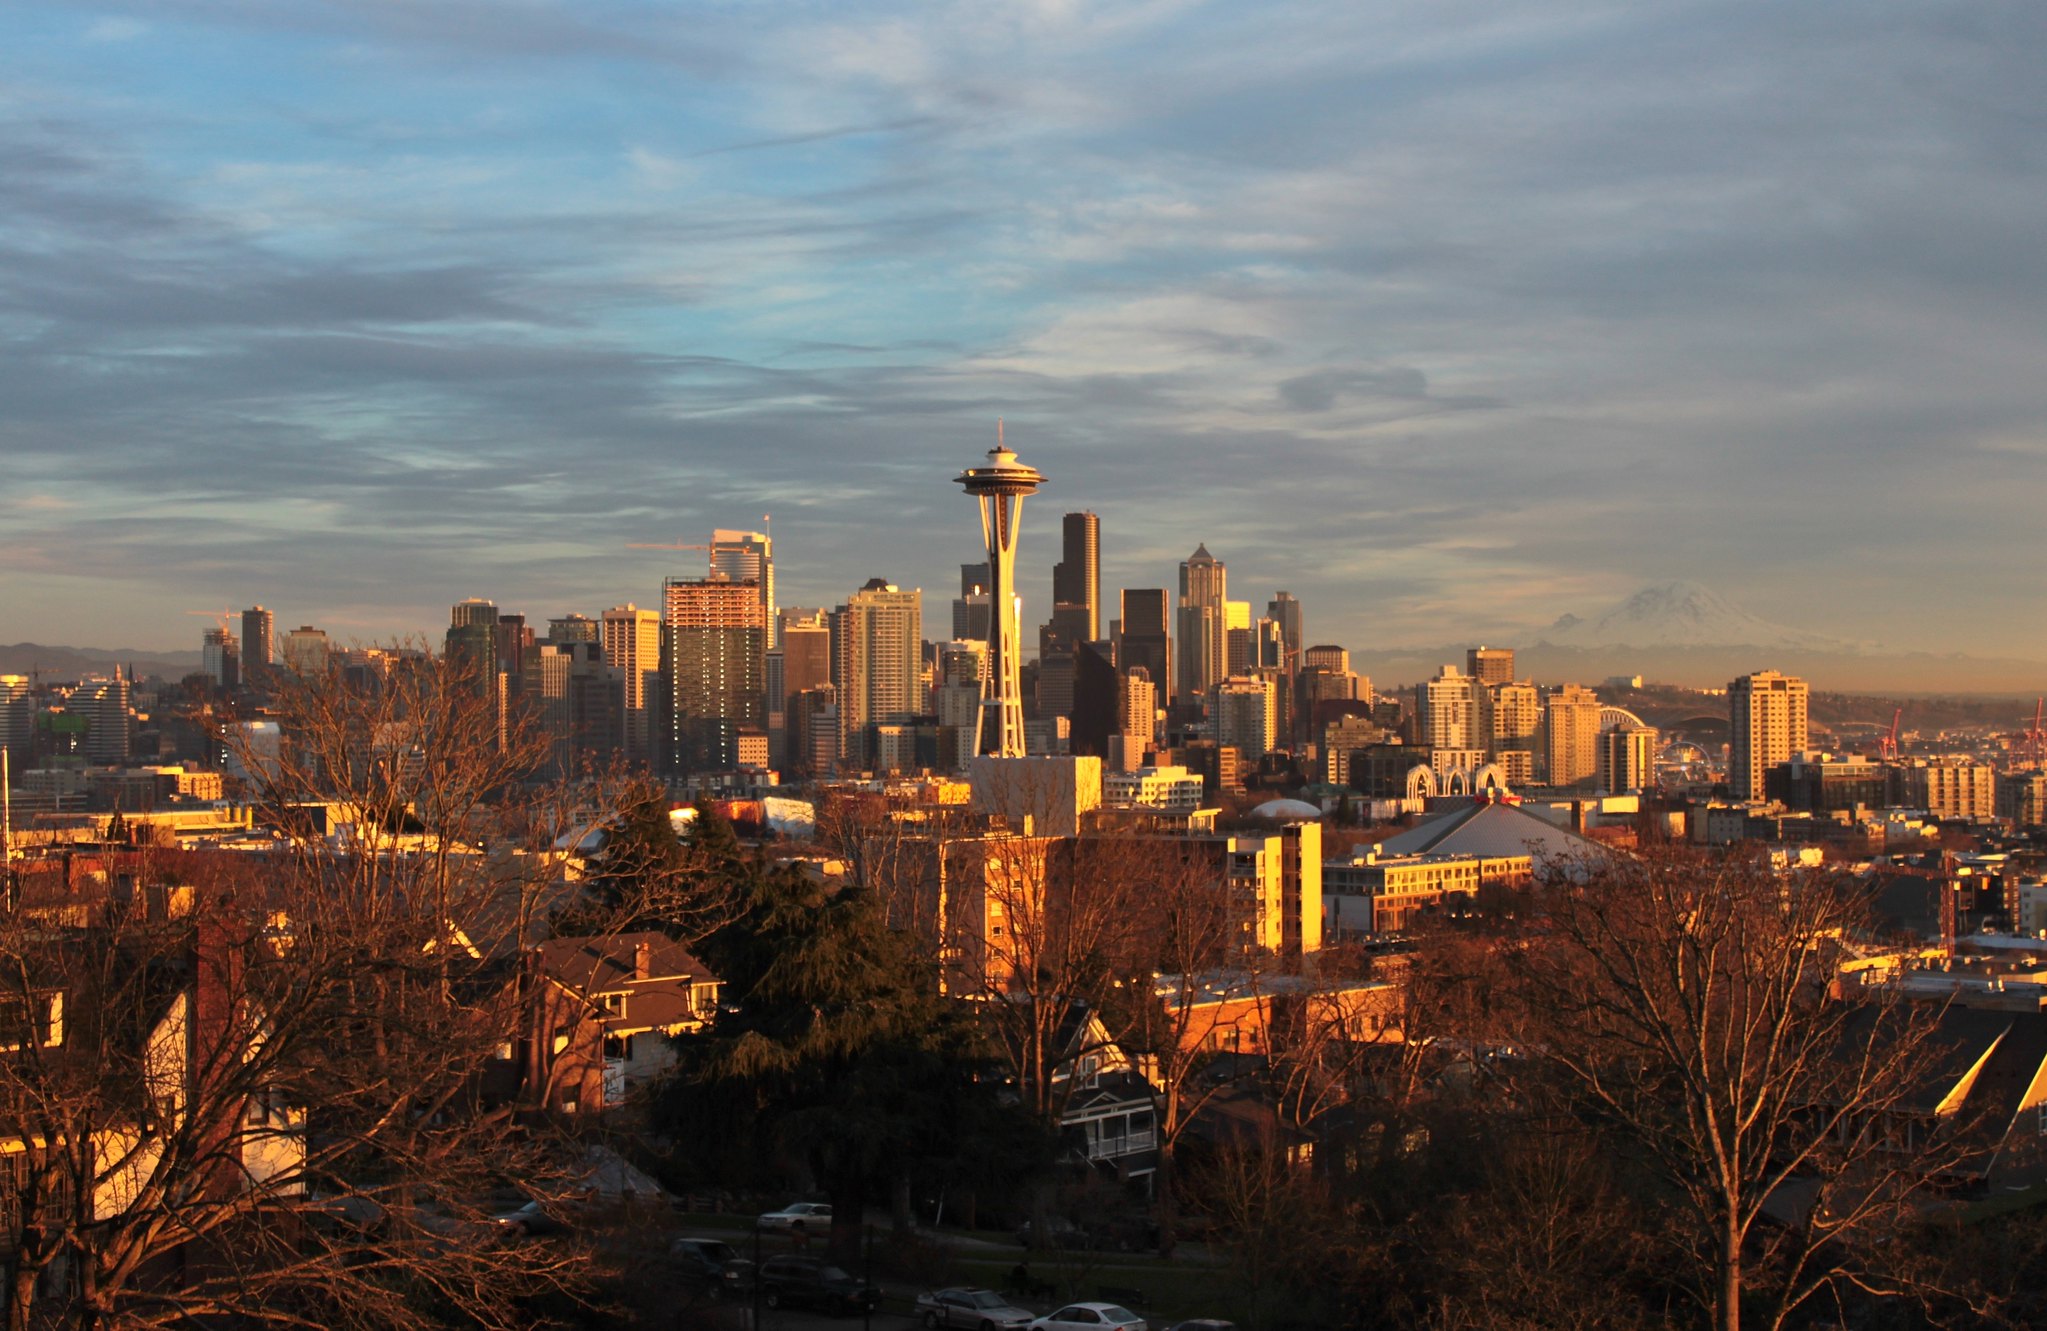 The Seattle skyline at sunset. Photo by SounderBruce.